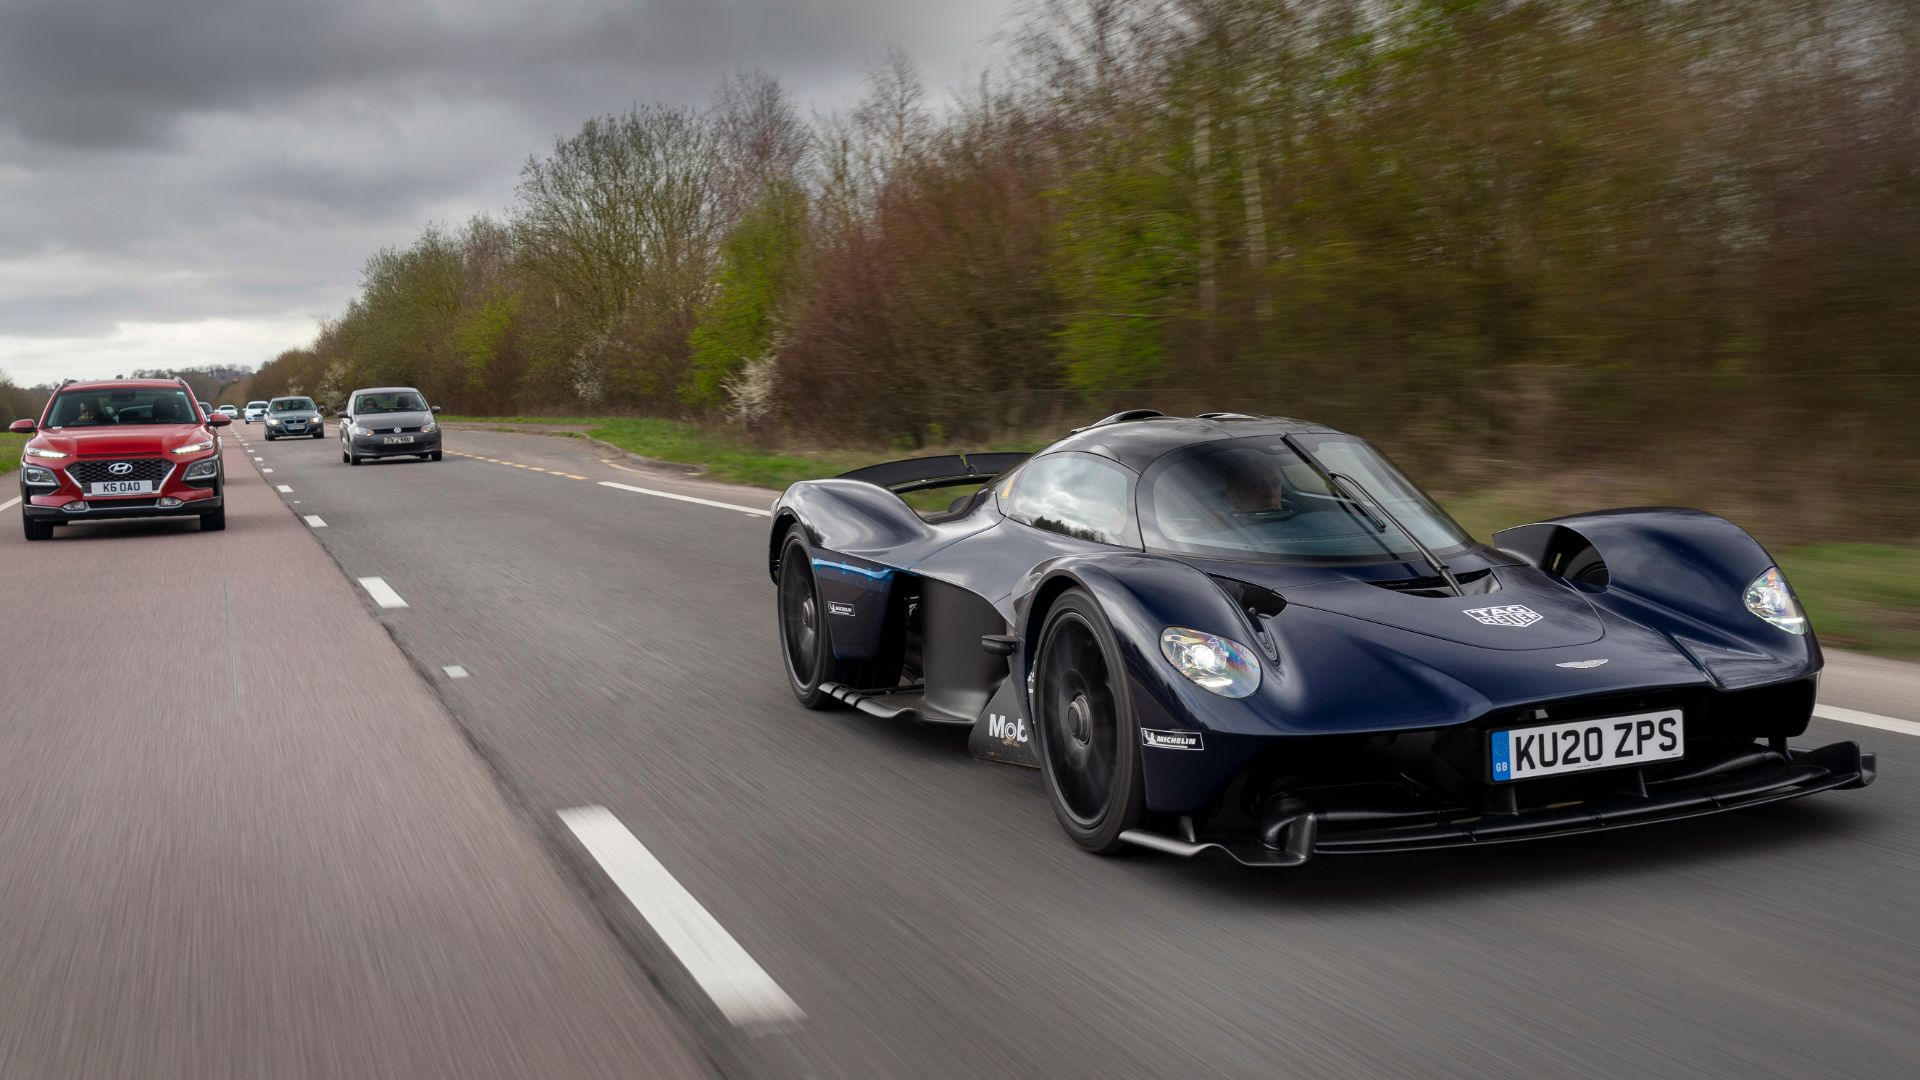 Aston Martin Valkyrie testing on the road